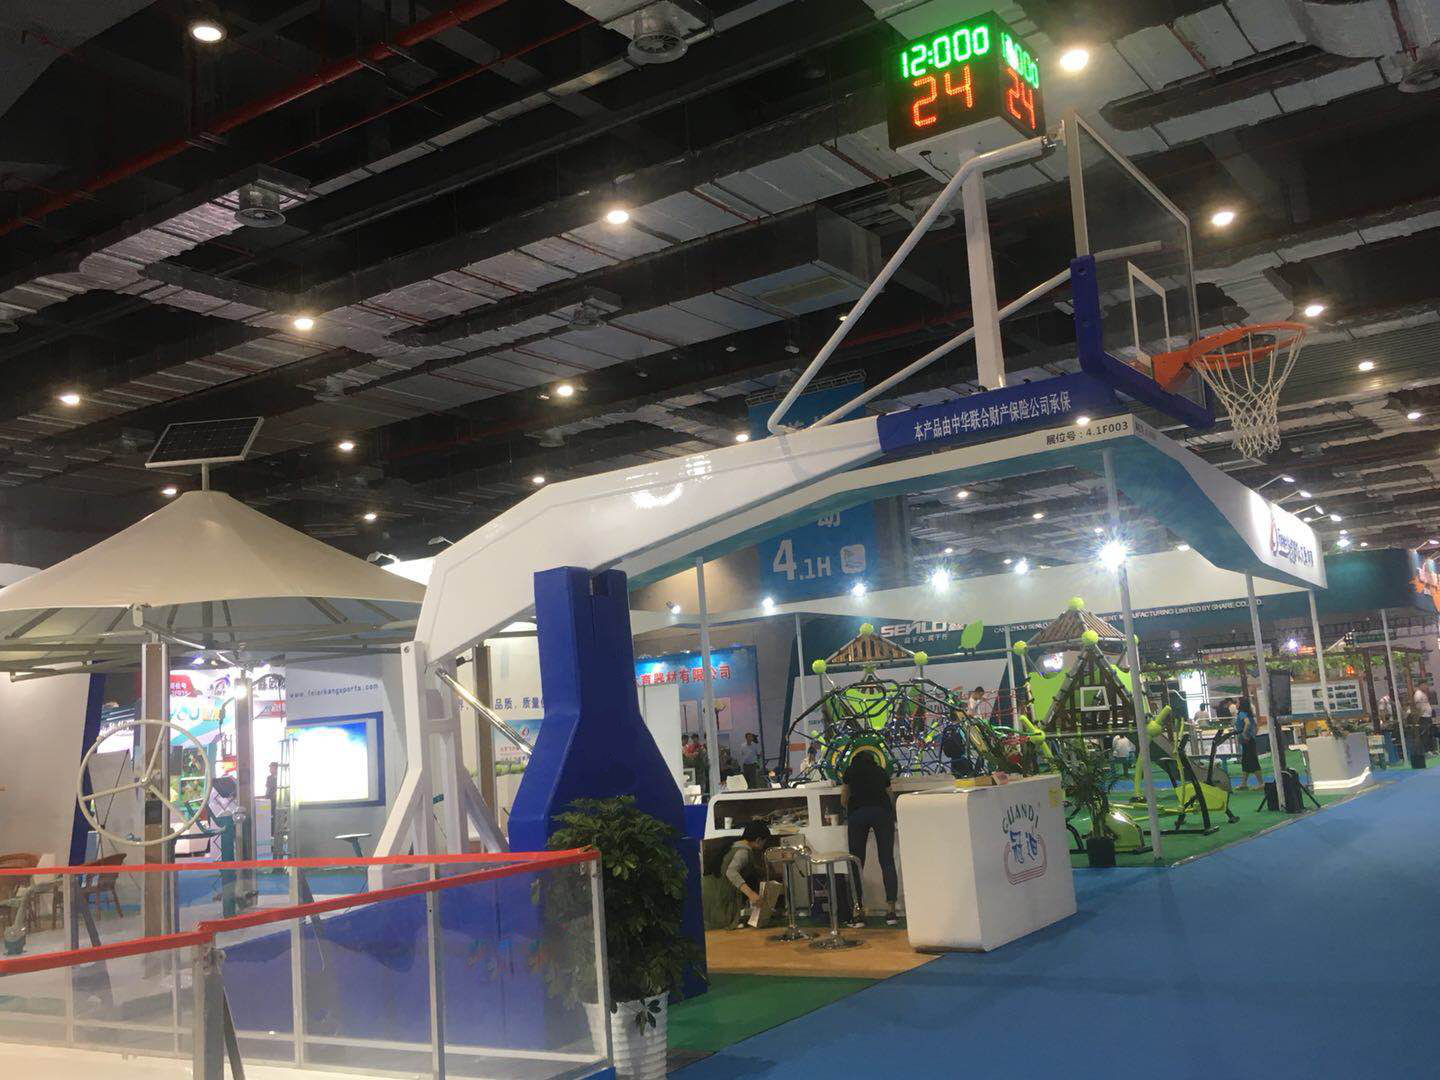 Basketball exposition stand